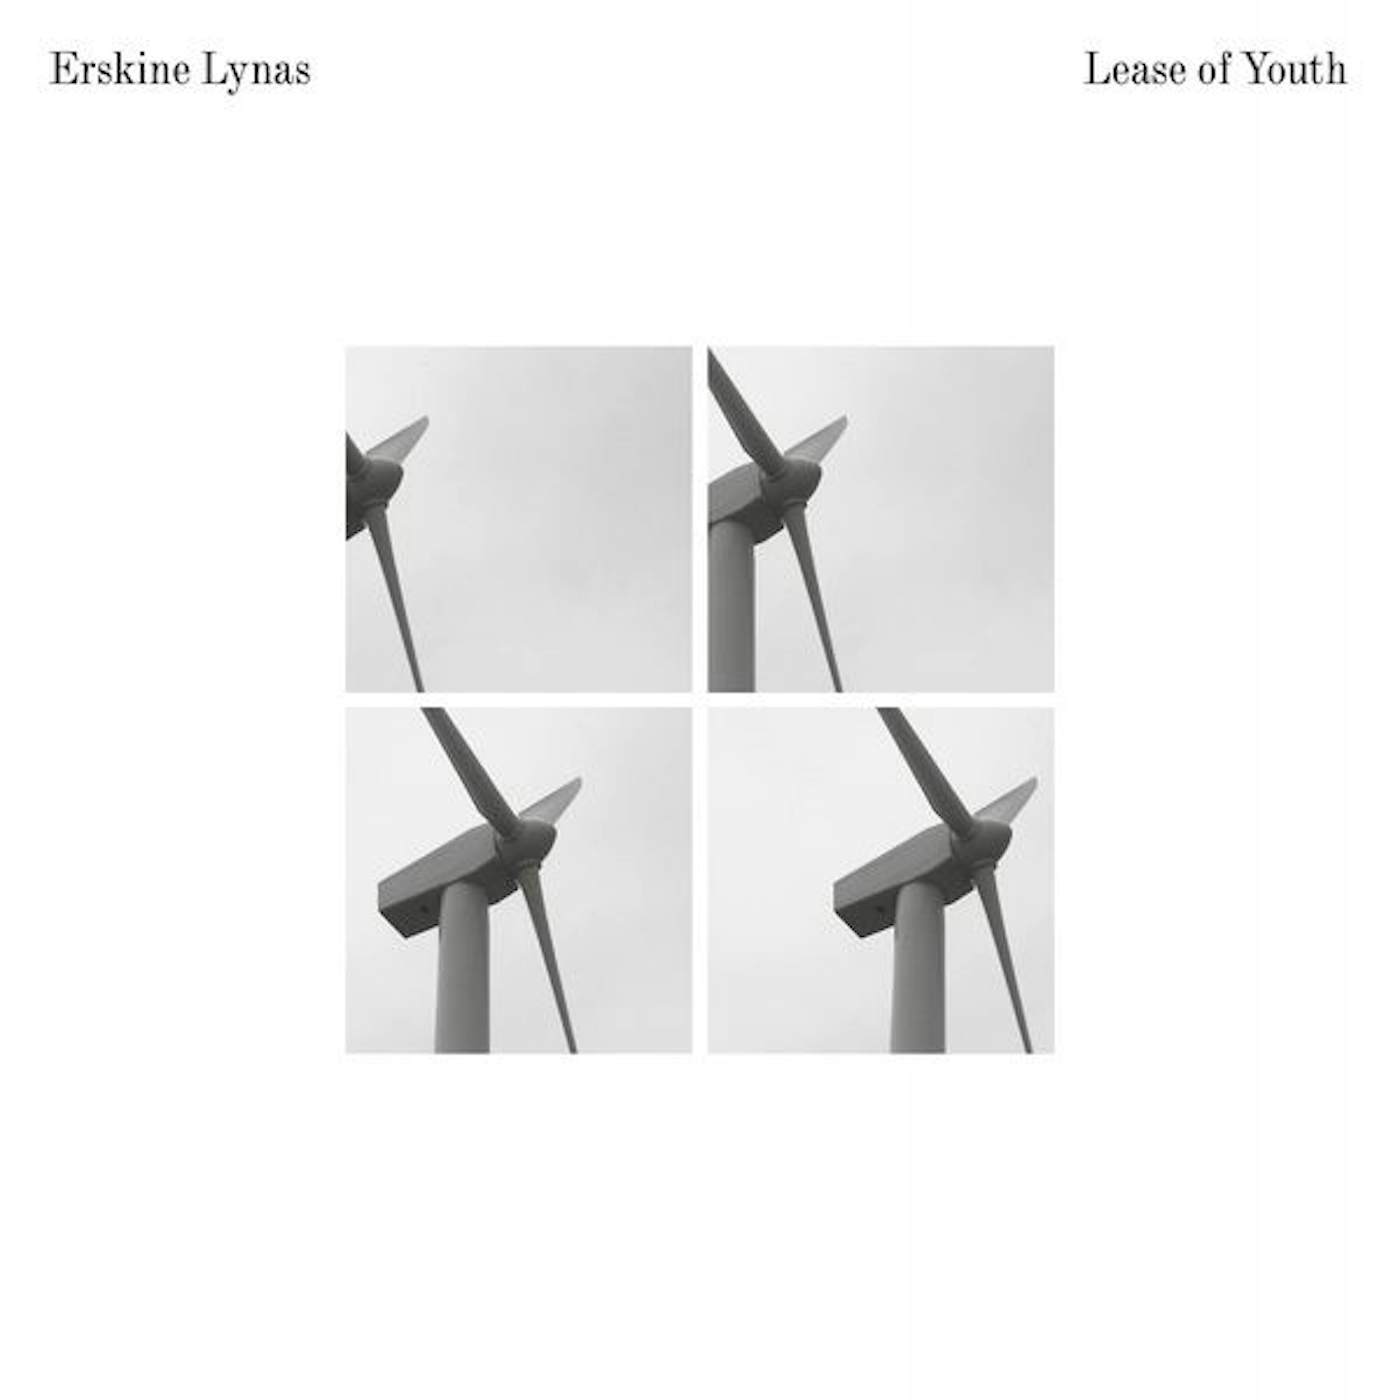 Erskine Lynas Lease of Youth Vinyl Record